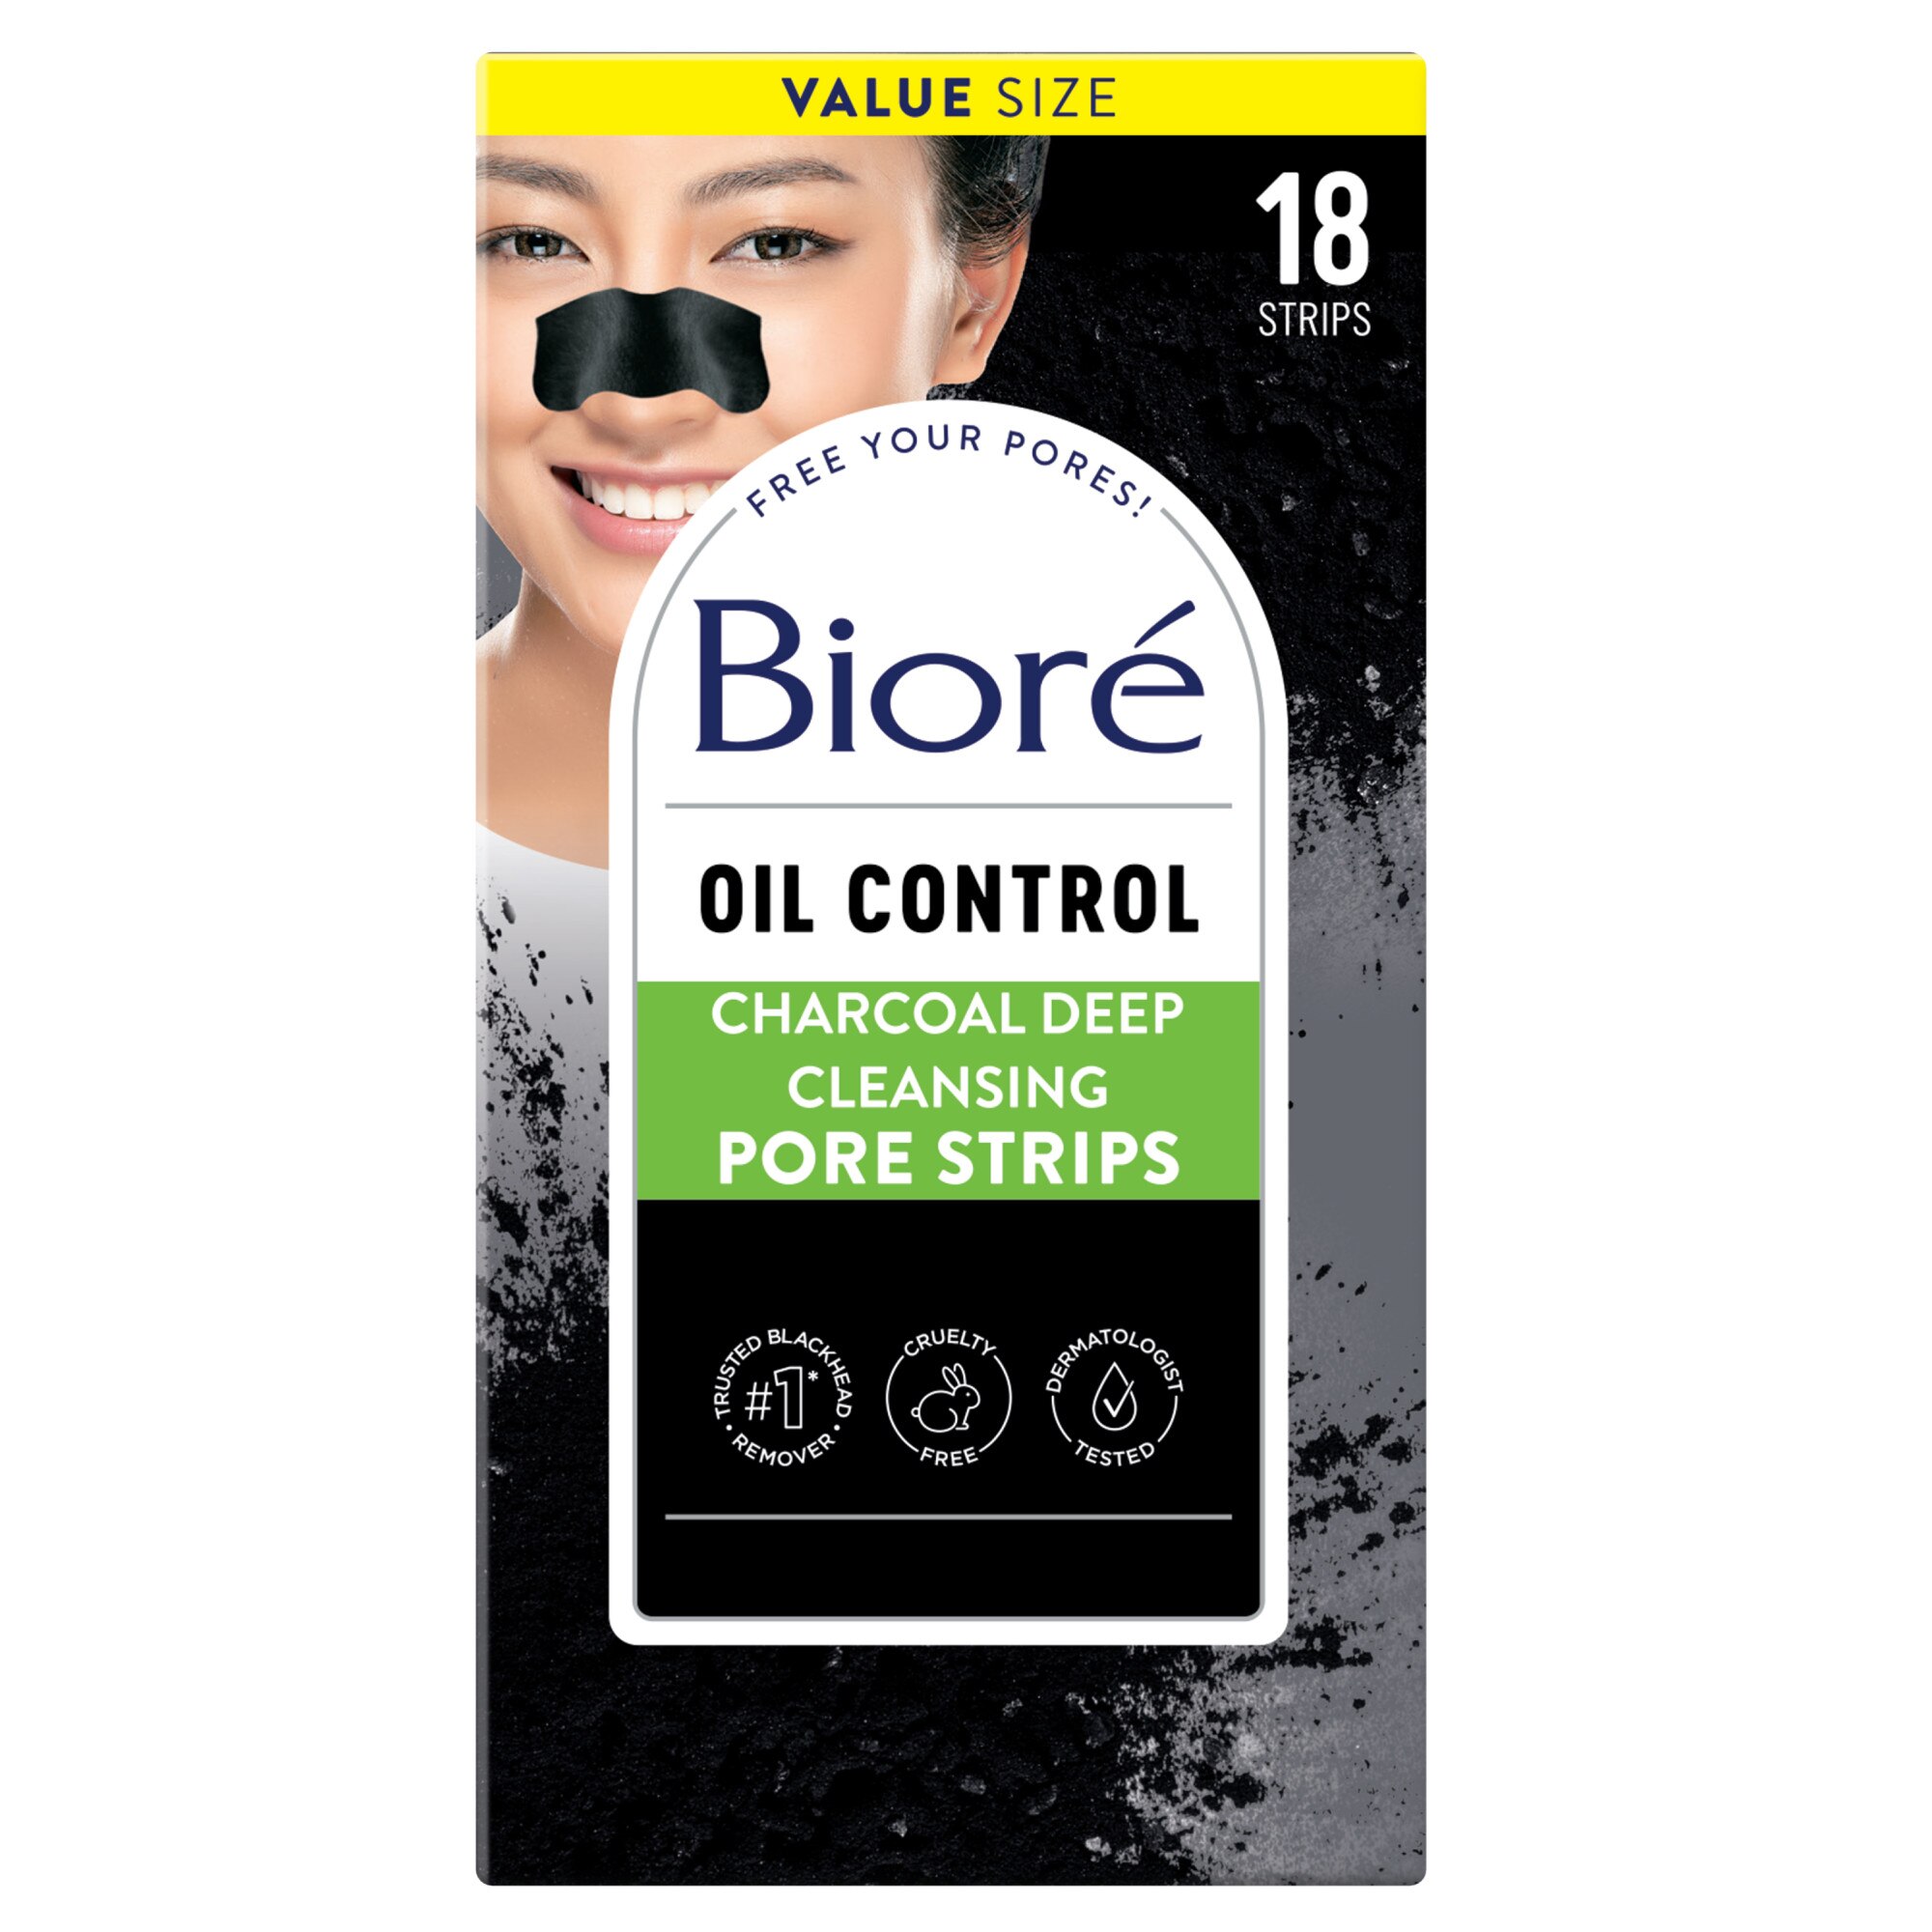 Biore Charcoal Deep Cleansing Pore Strips, Nose Strips for Blackhead Removal on Oily Skin, 18CT